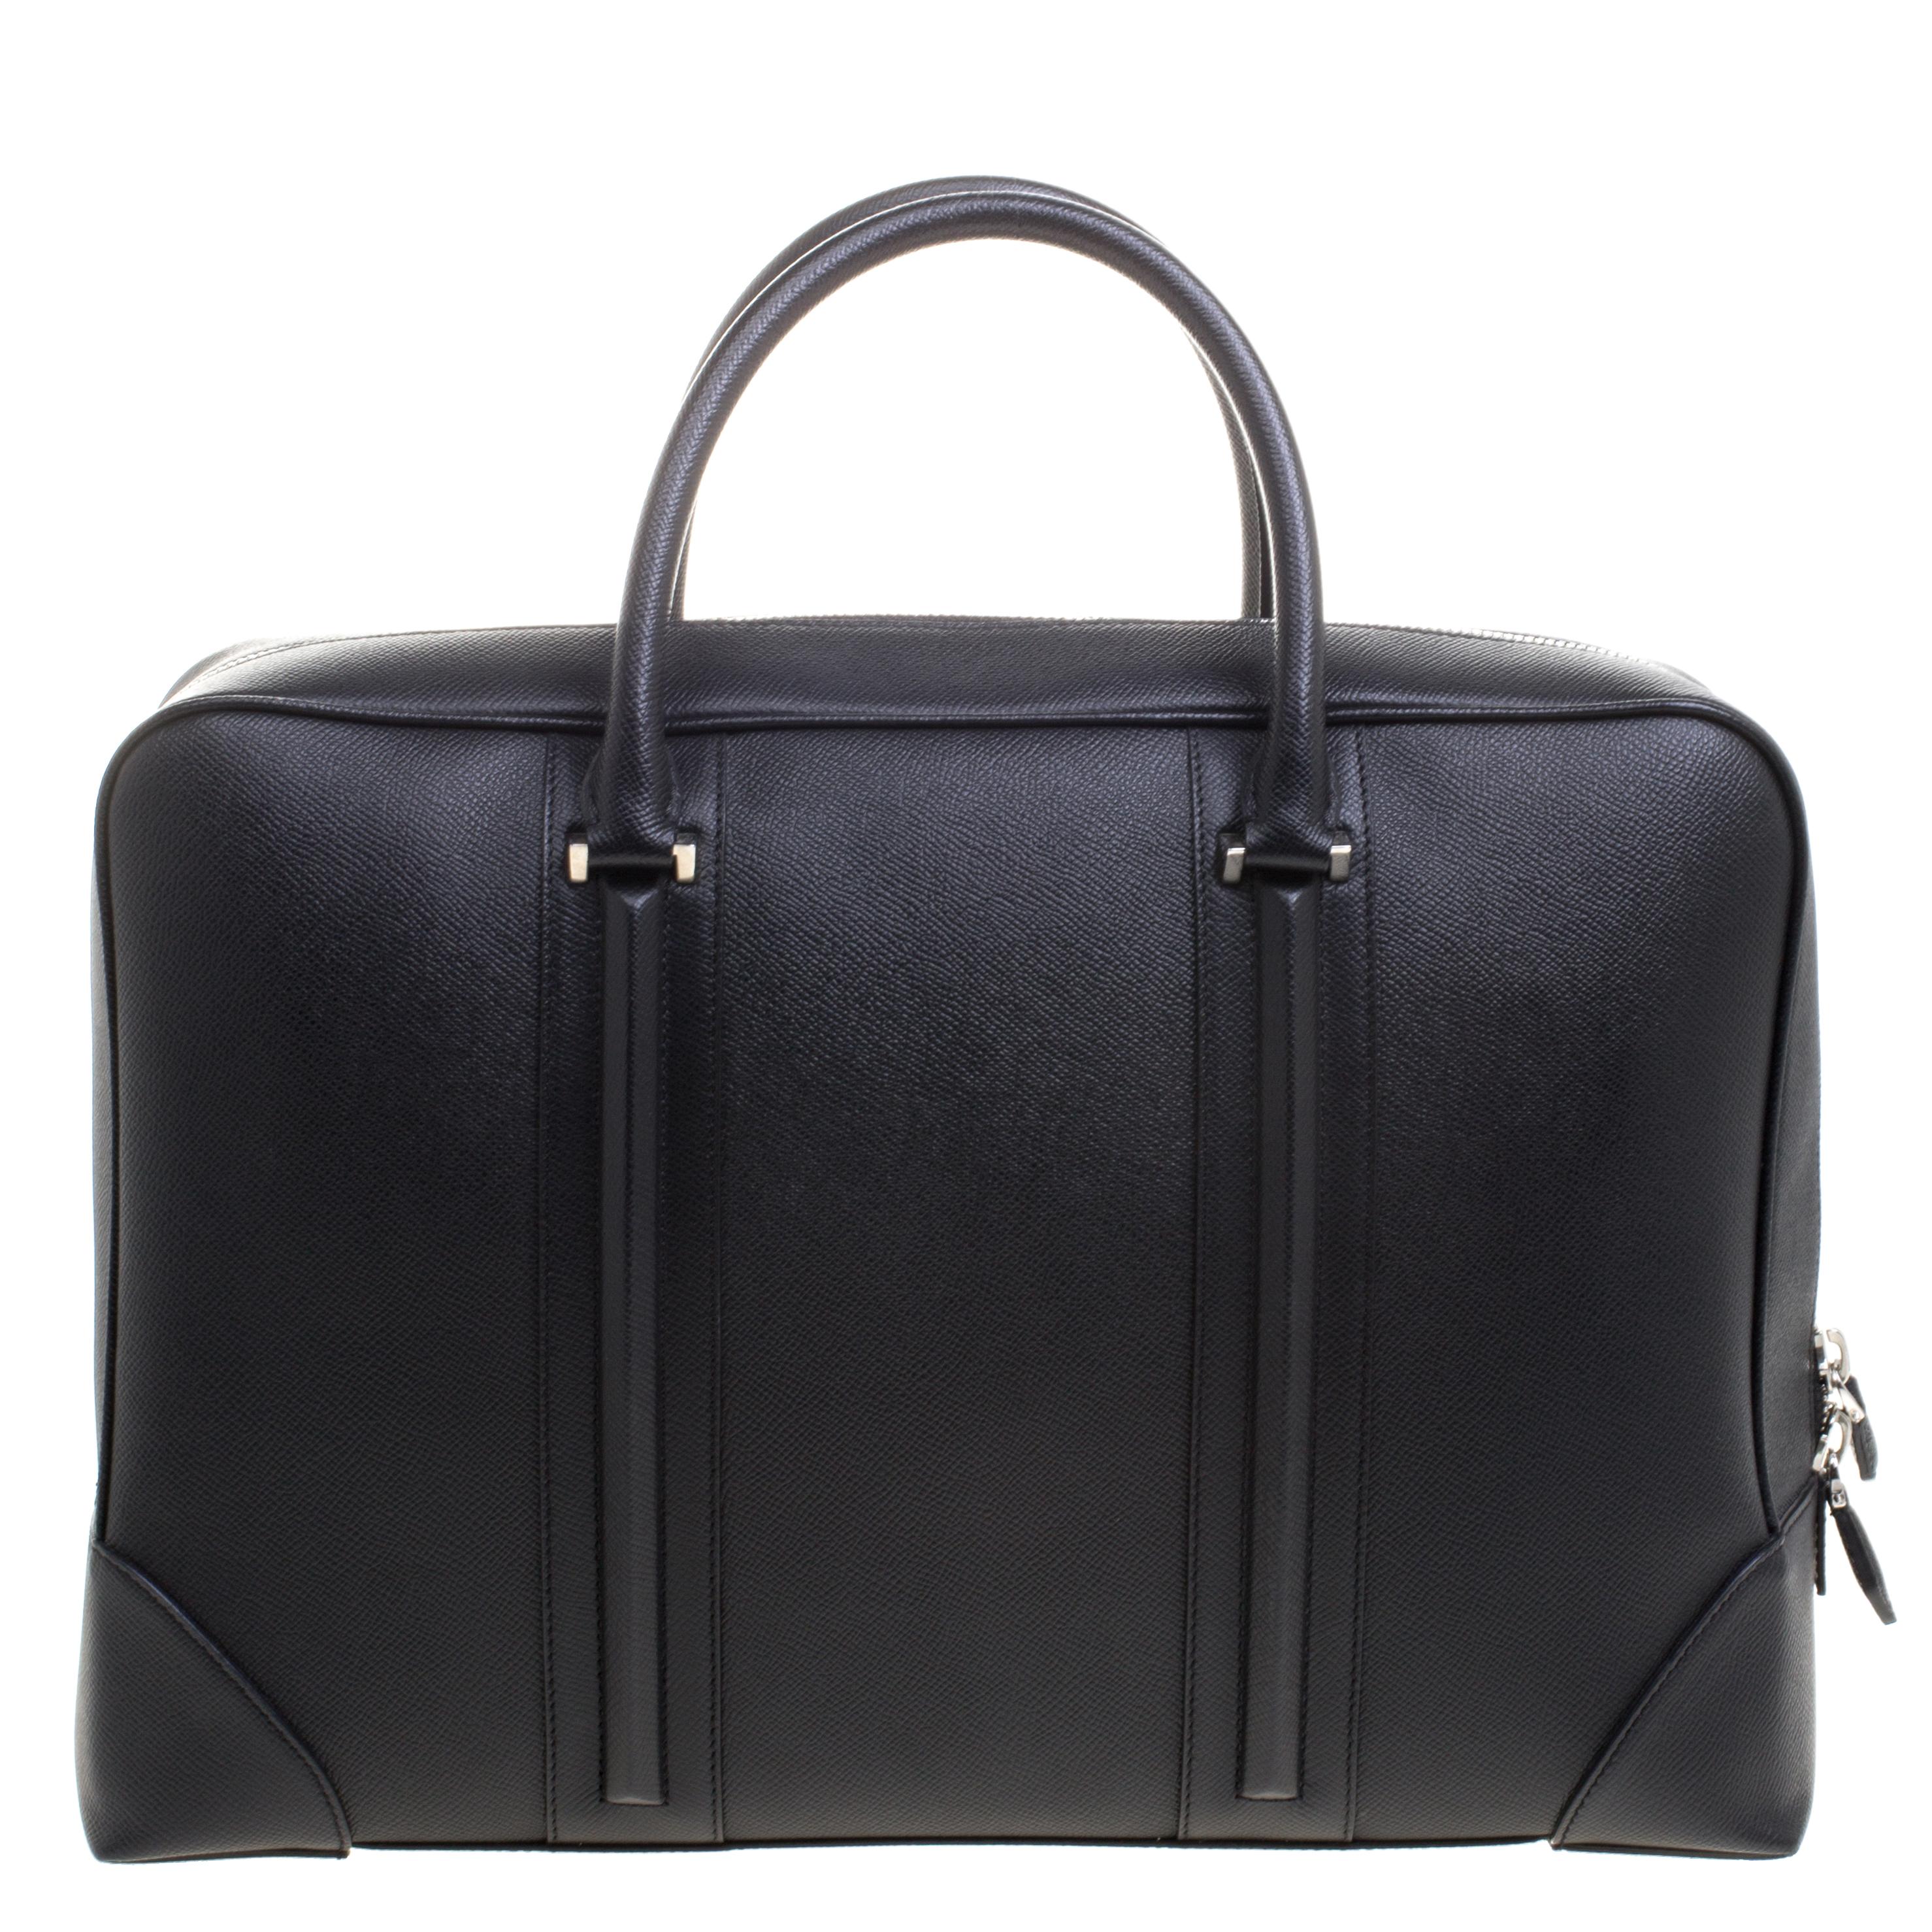 Leather products like this briefcase from Givenchy are not only symbols of style but also reliability. Crafted from leather, this briefcase features two top handles and zippers that open up to reveal a spacious fabric compartment perfectly sized to